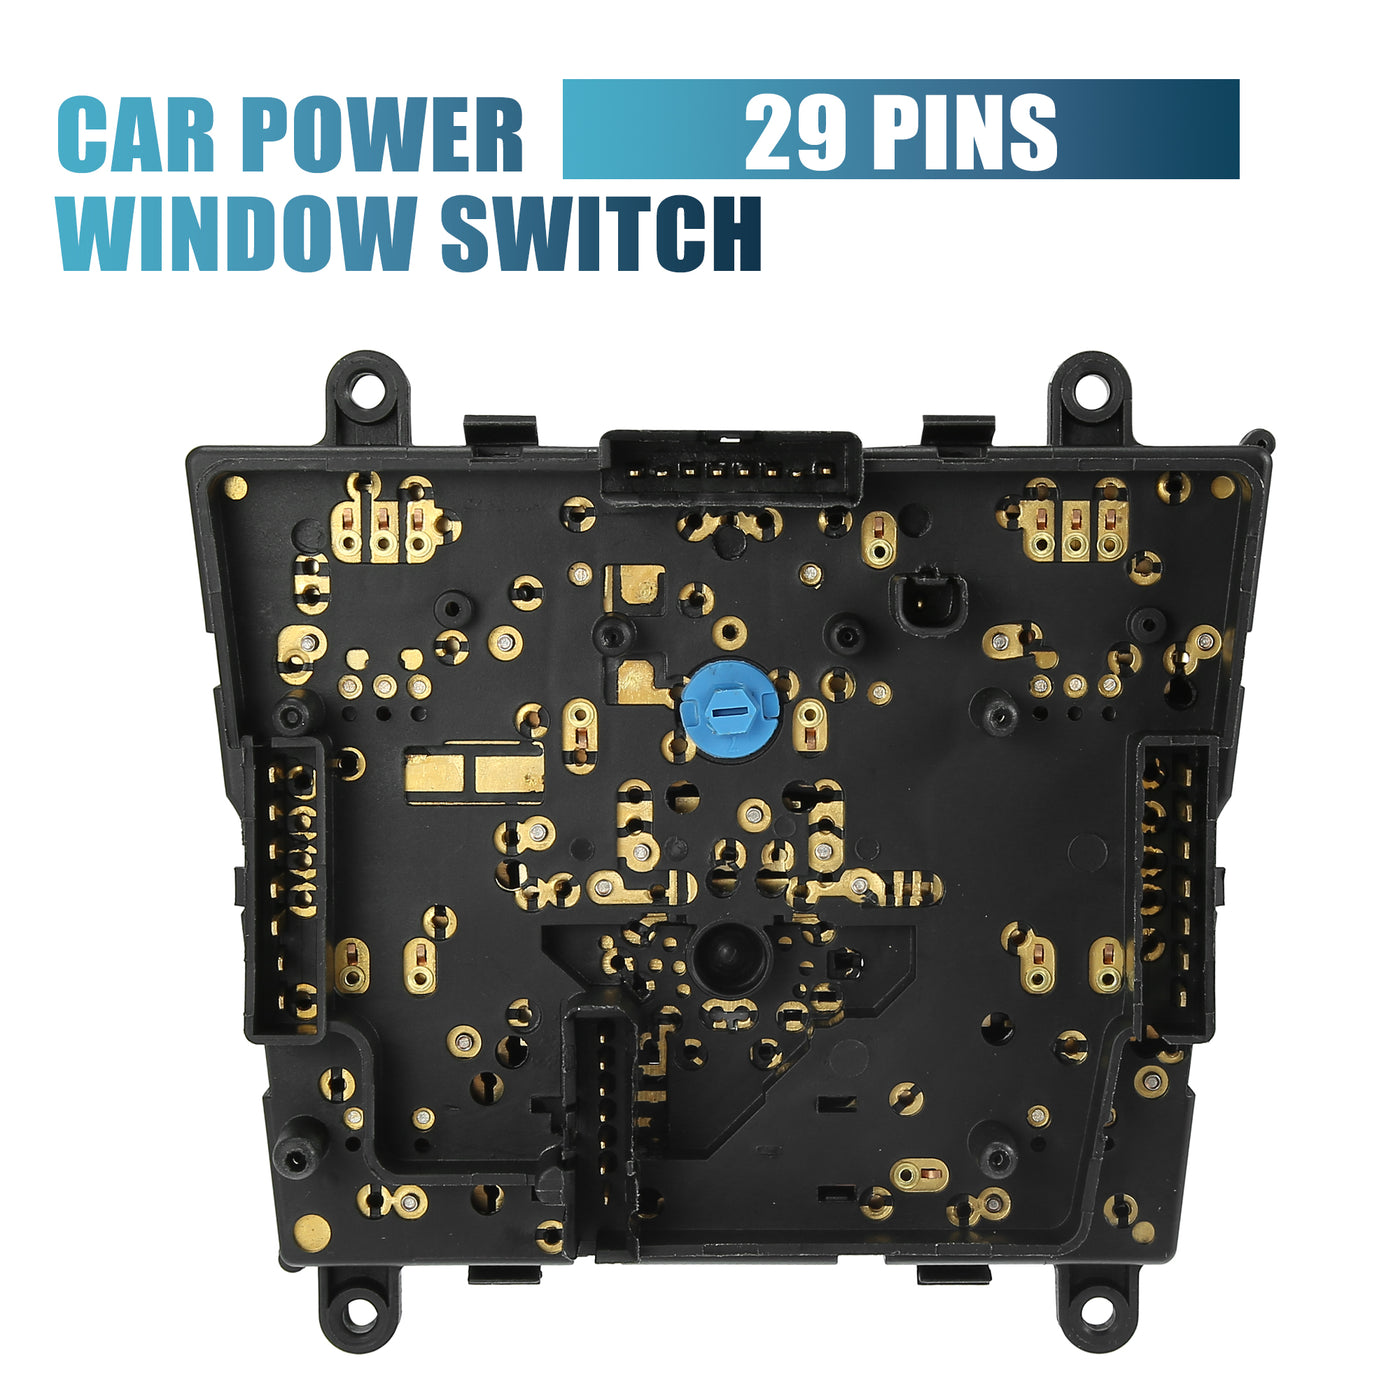 X AUTOHAUX Power Window Switch Driver Side Power Window Master Control Switch 1638206610 Replacement for Mercedes-Benz ML430 1999-2001